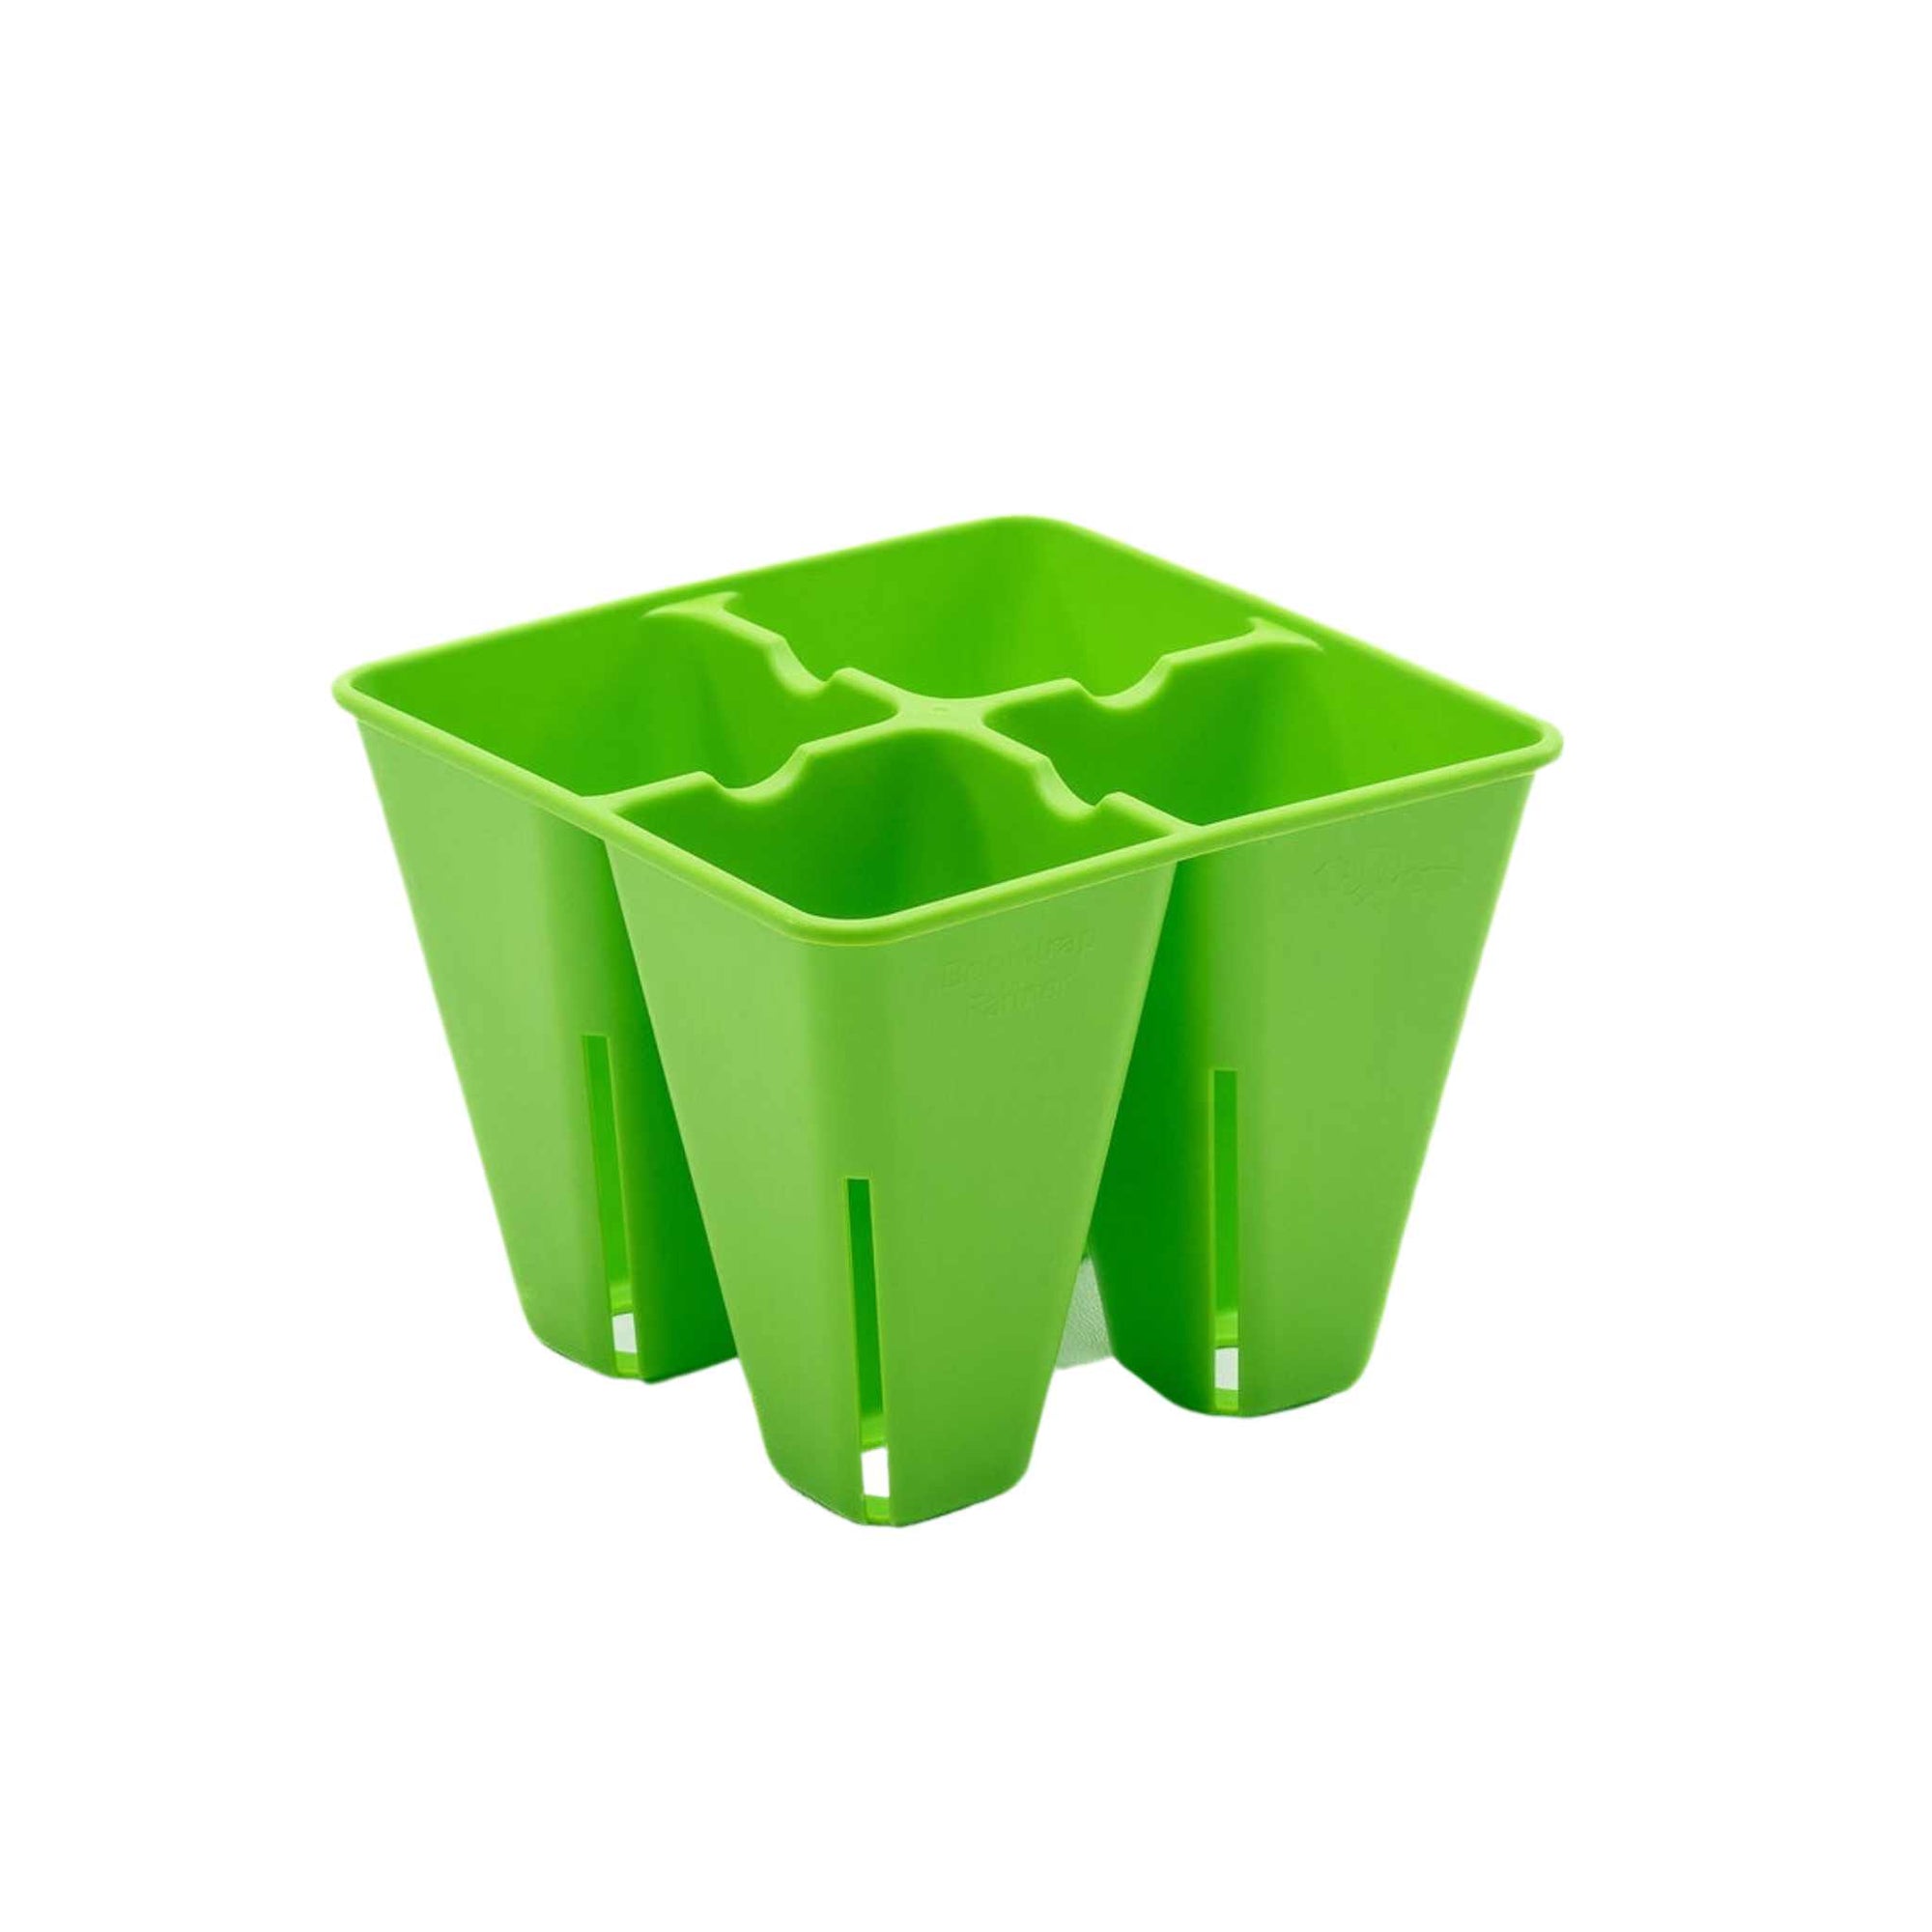 Green 4 Cell Plug Tray